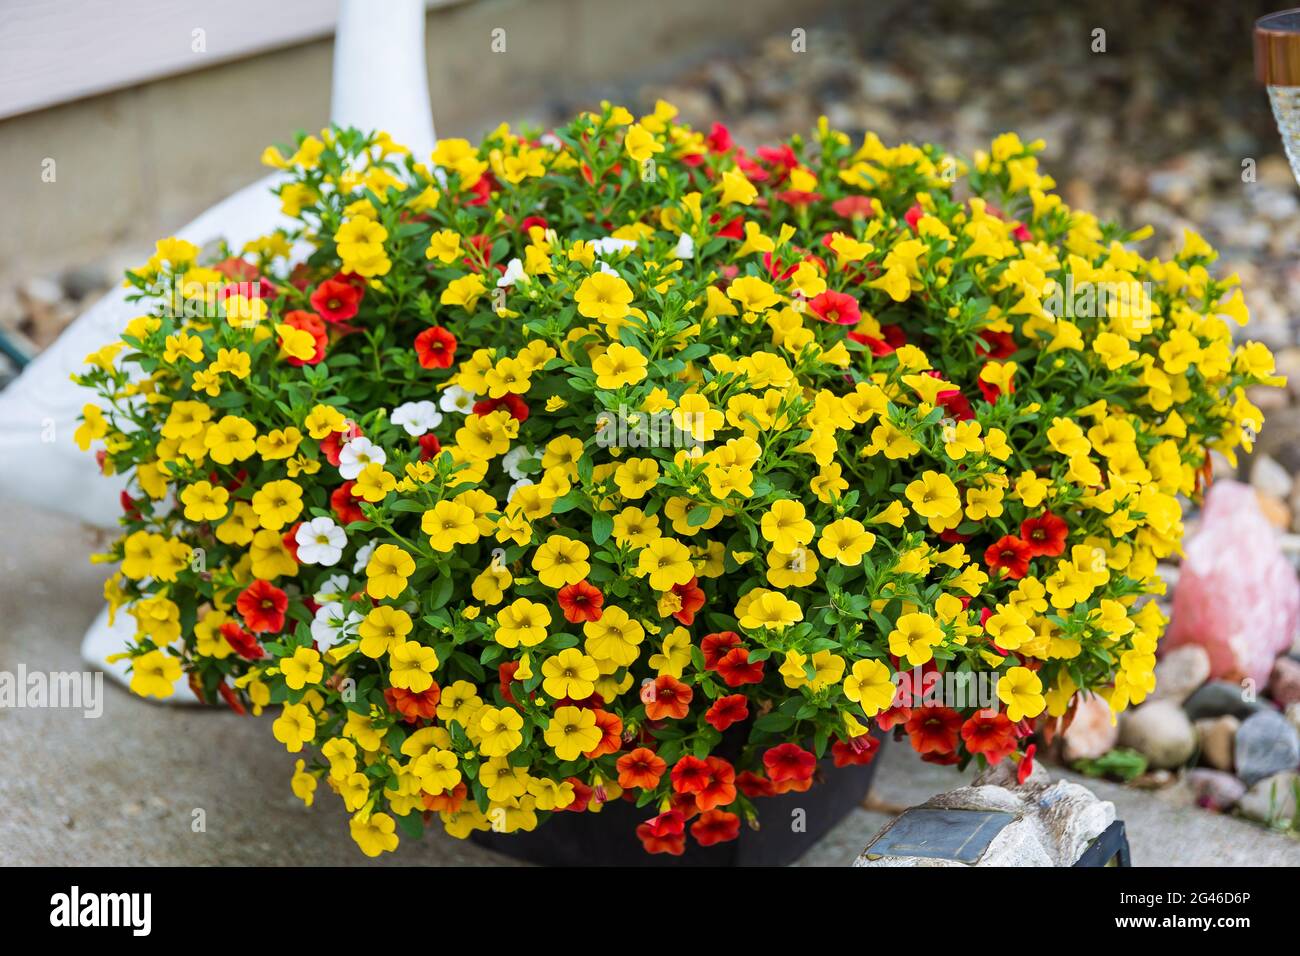 a planter full of red, yellow and white million bells flowers growing larger every day Stock Photo